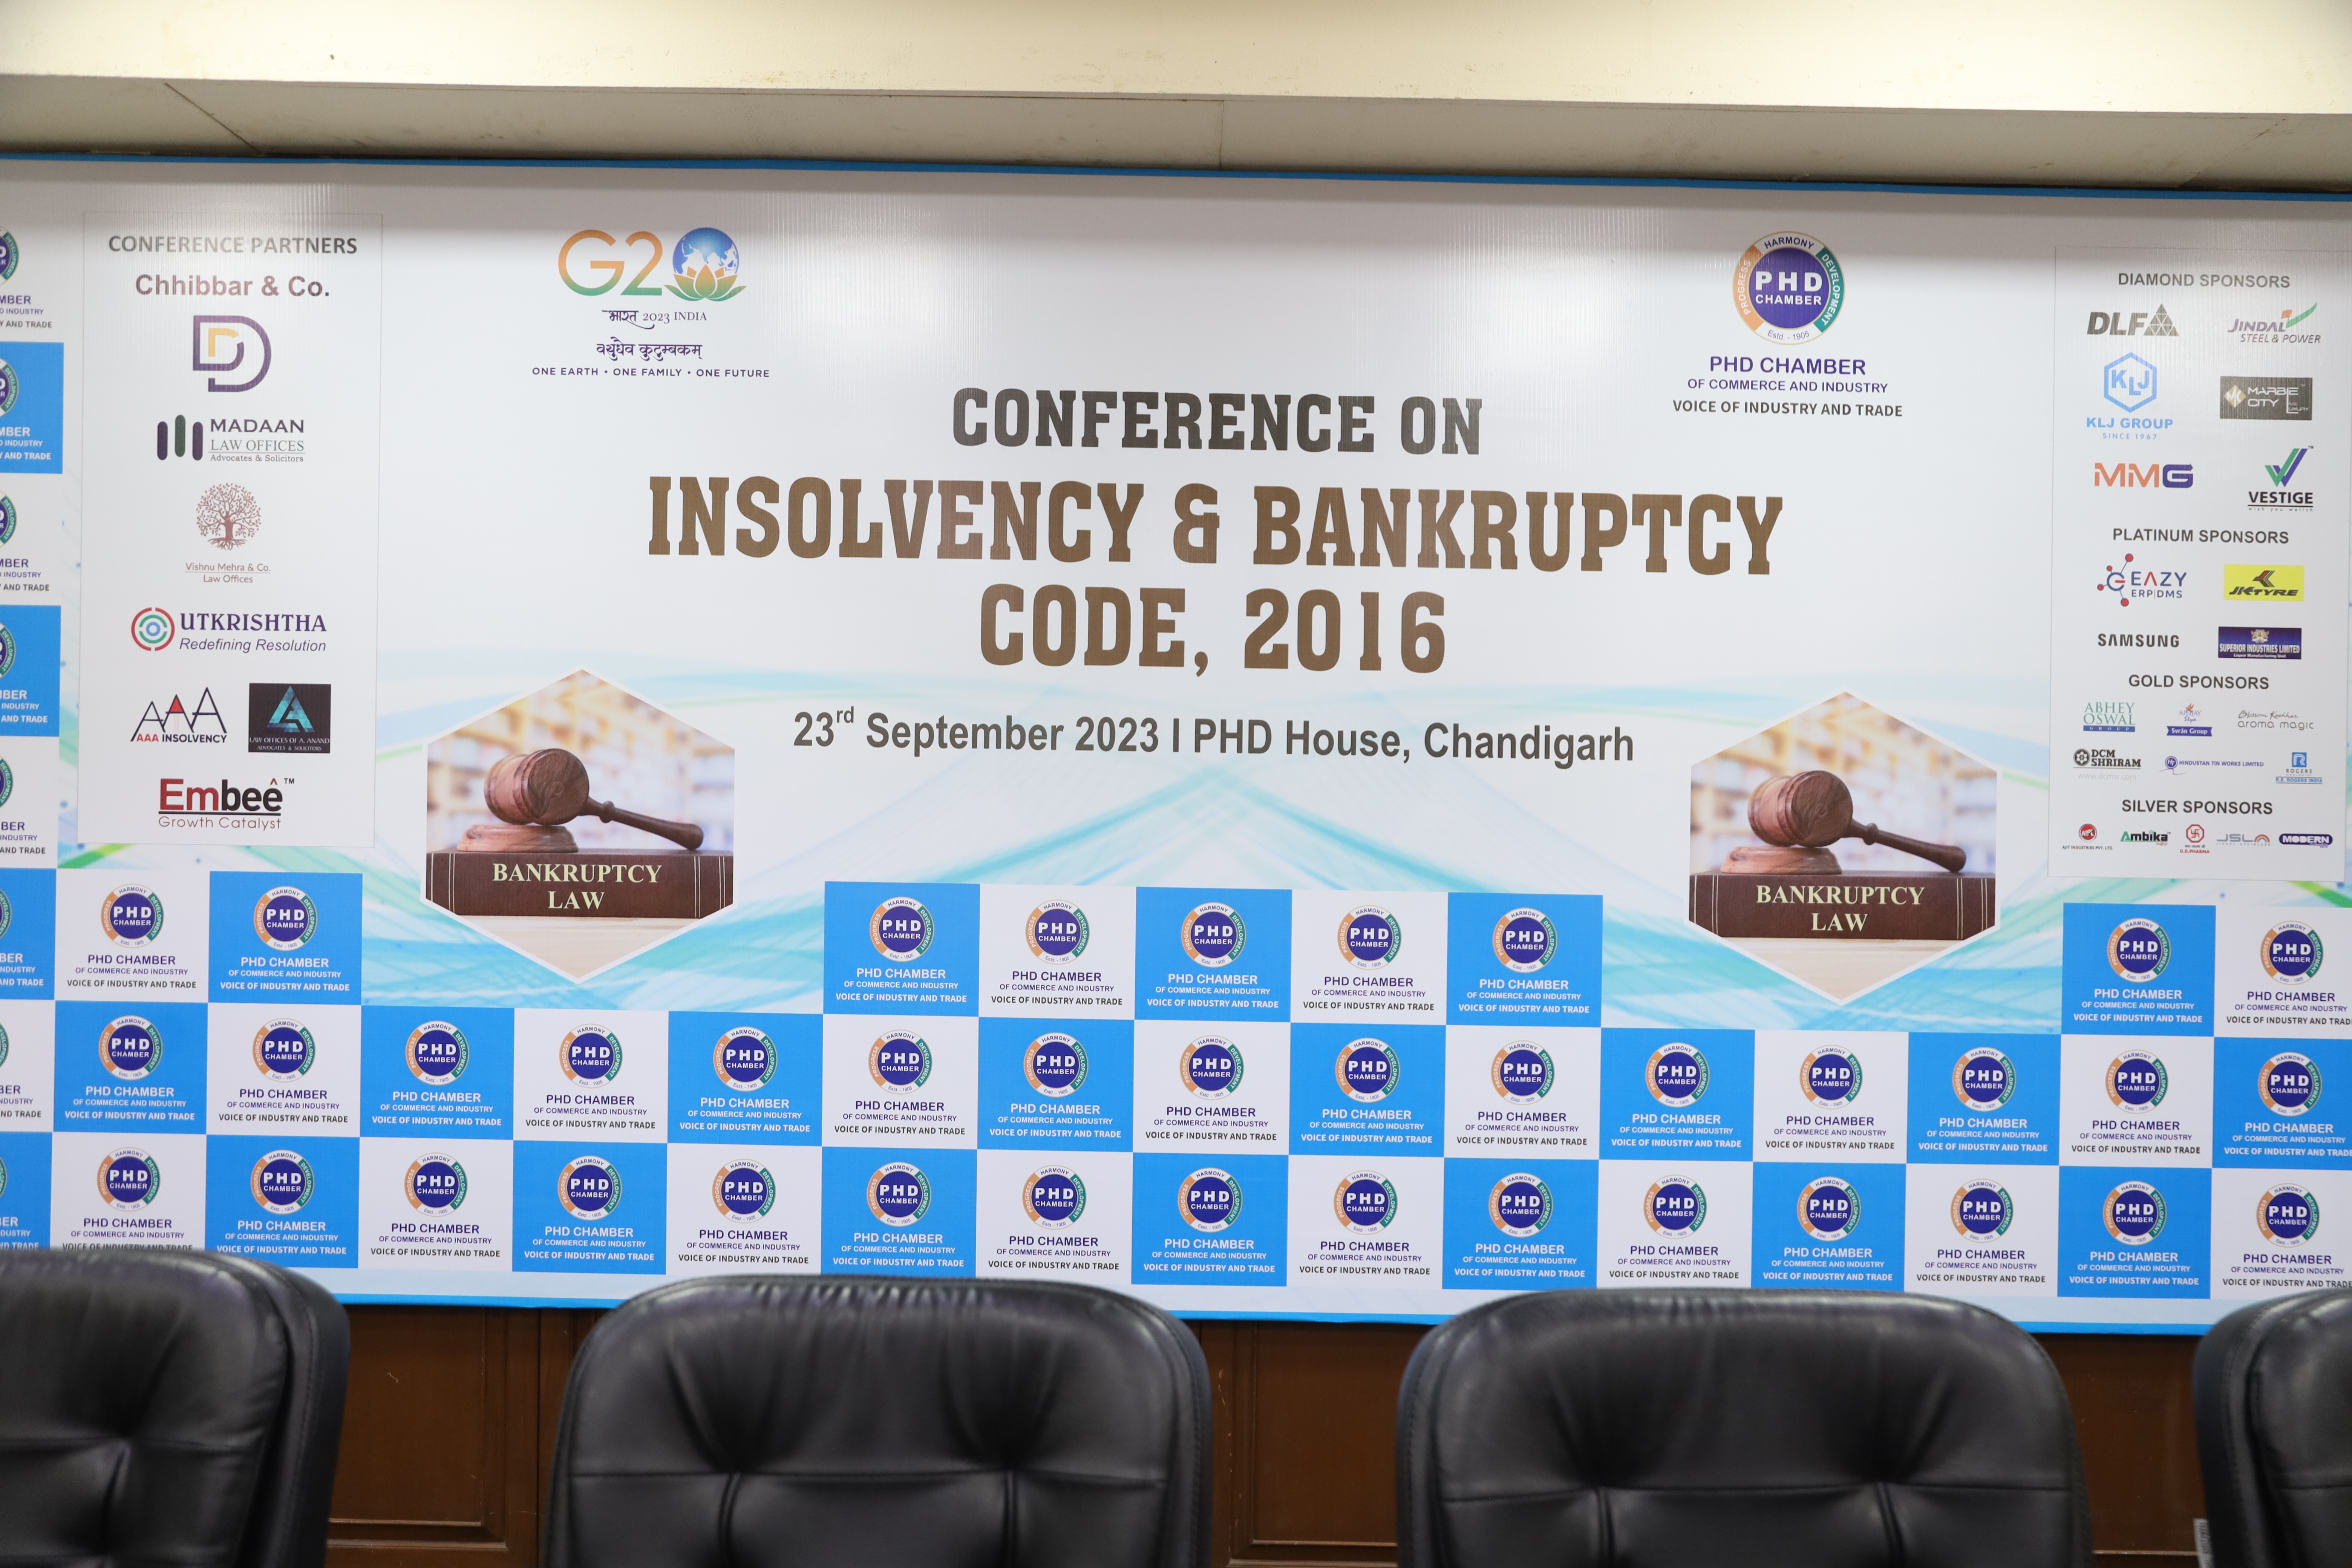 Conference on Insolvency & Bankruptcy Code